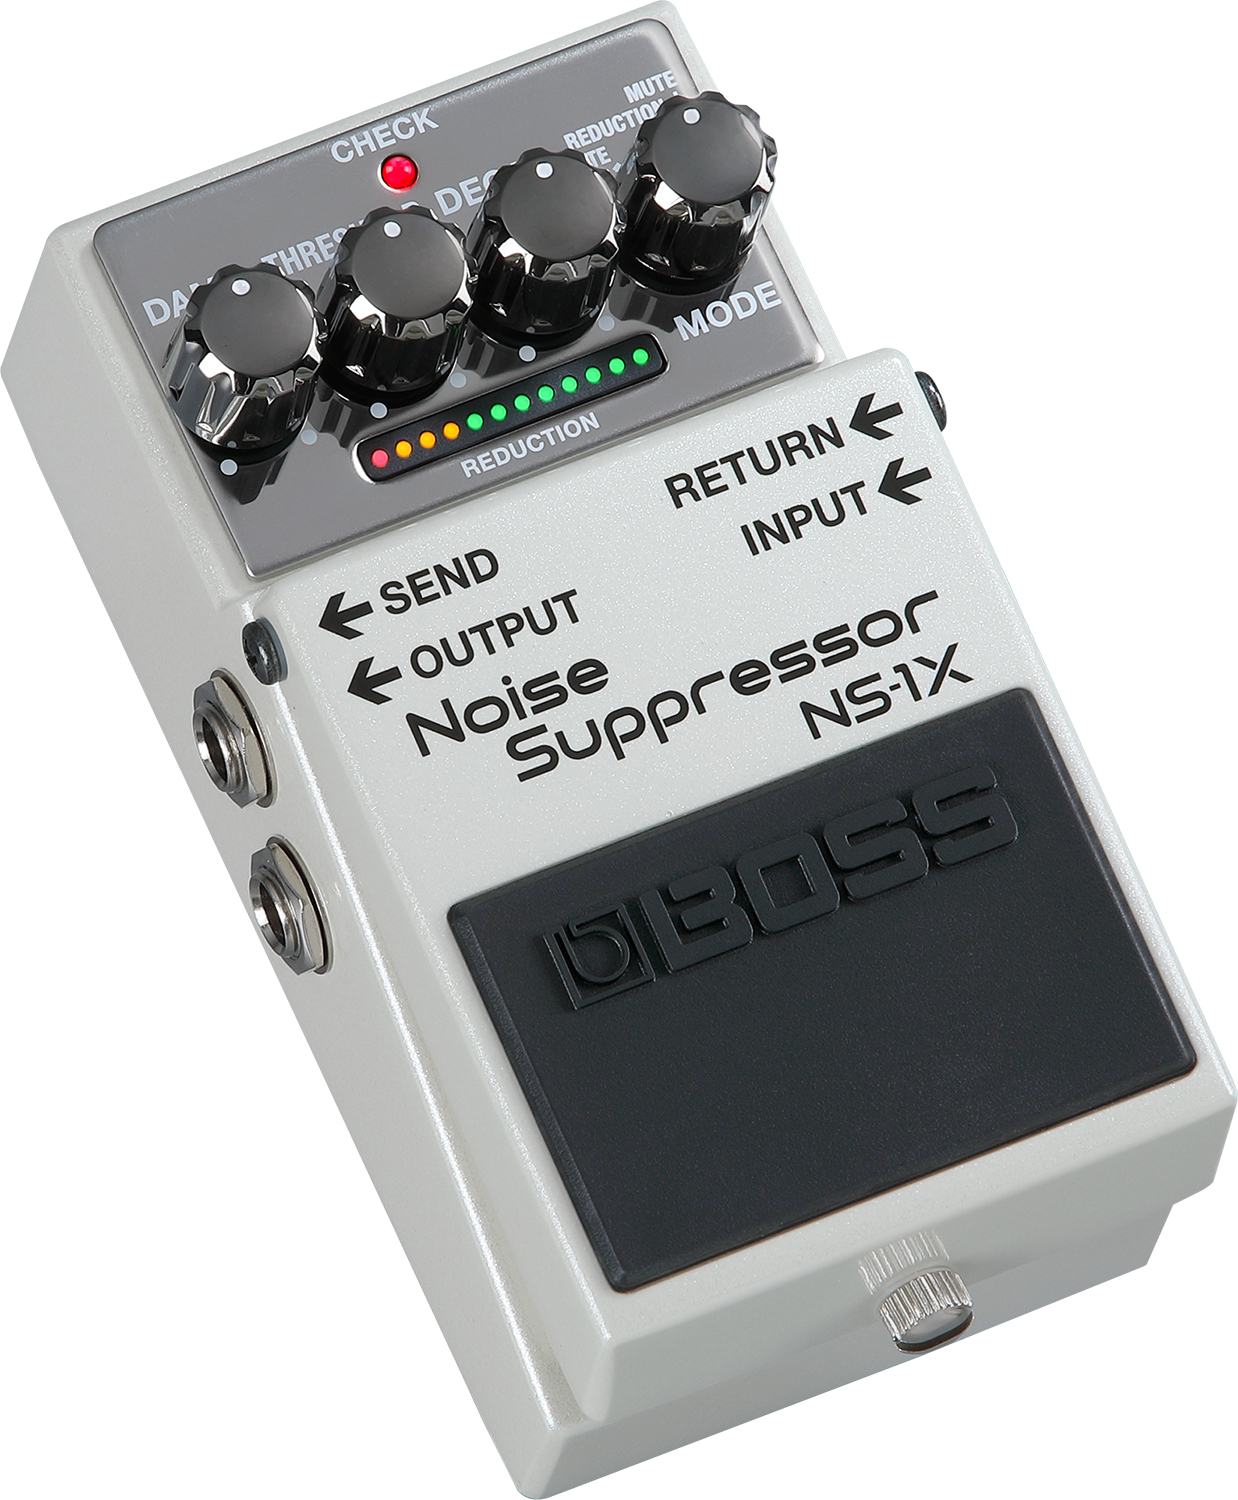 Boss Ns-1x Noise Suppressor - Compressor/sustain/noise gate effect pedaal - Variation 1